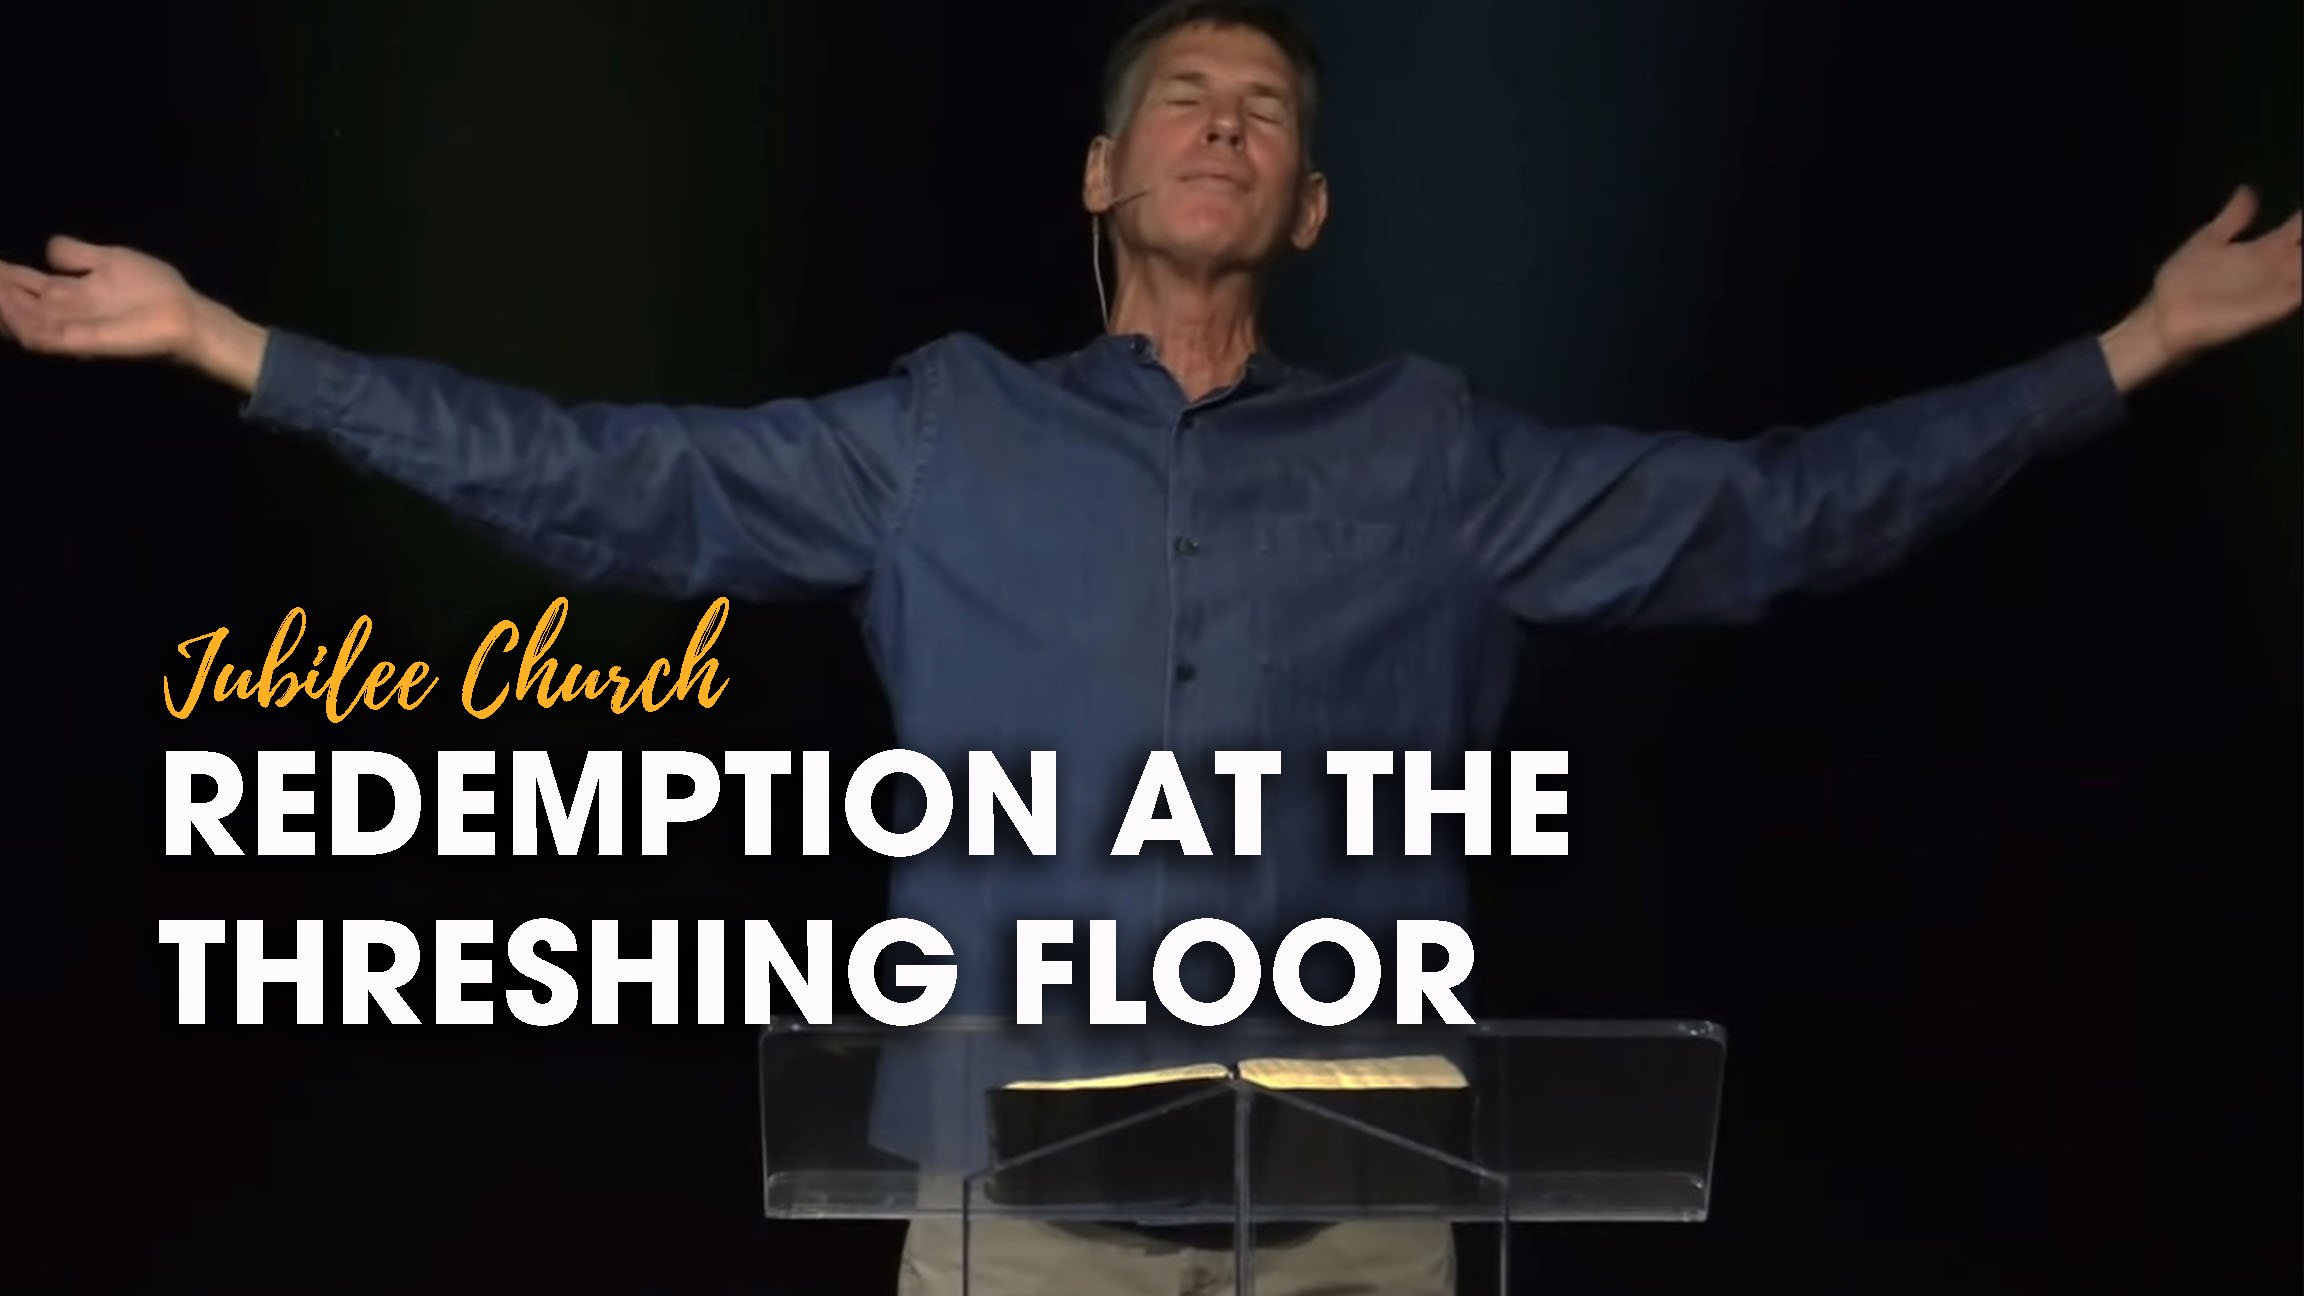 Redemption at the Threshing Floor